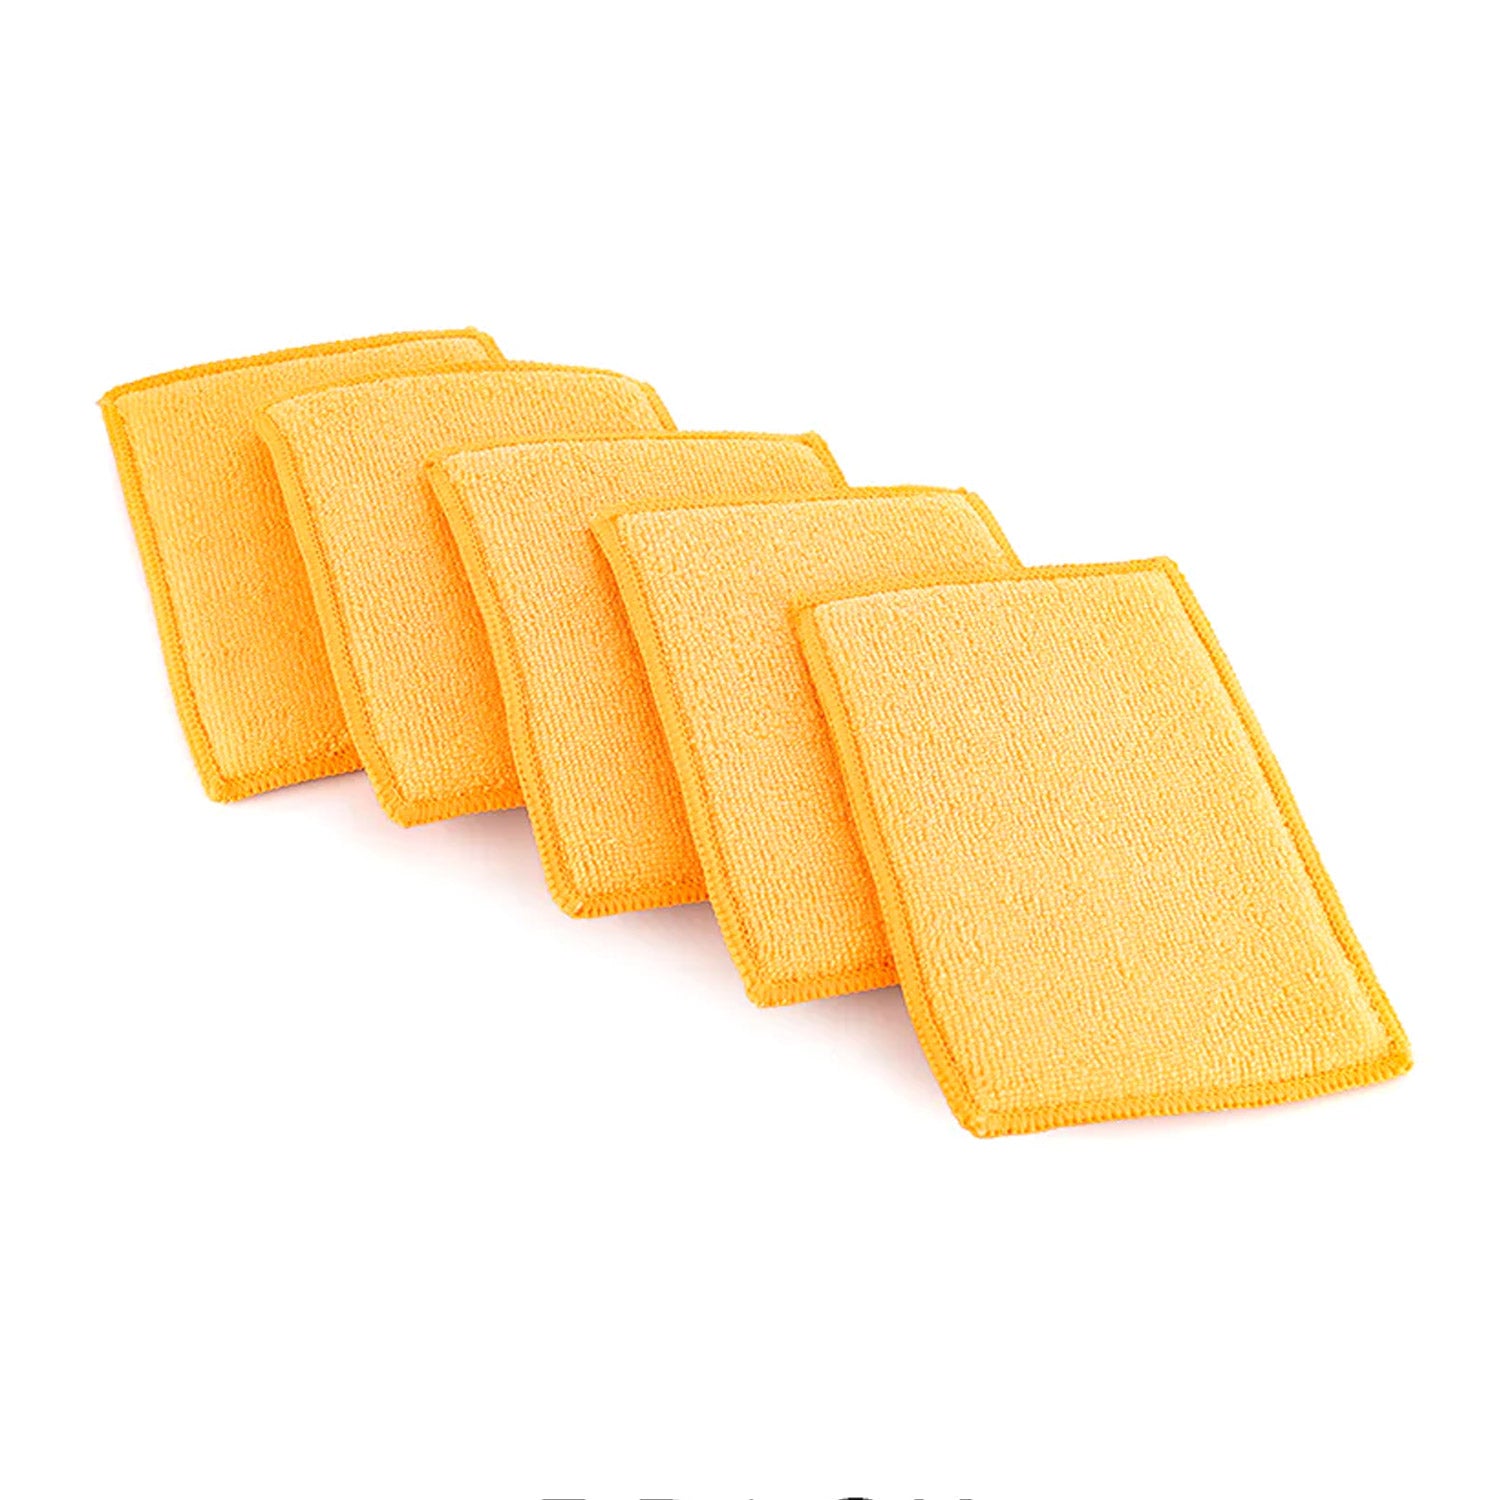 bug-scrubber-5-pack